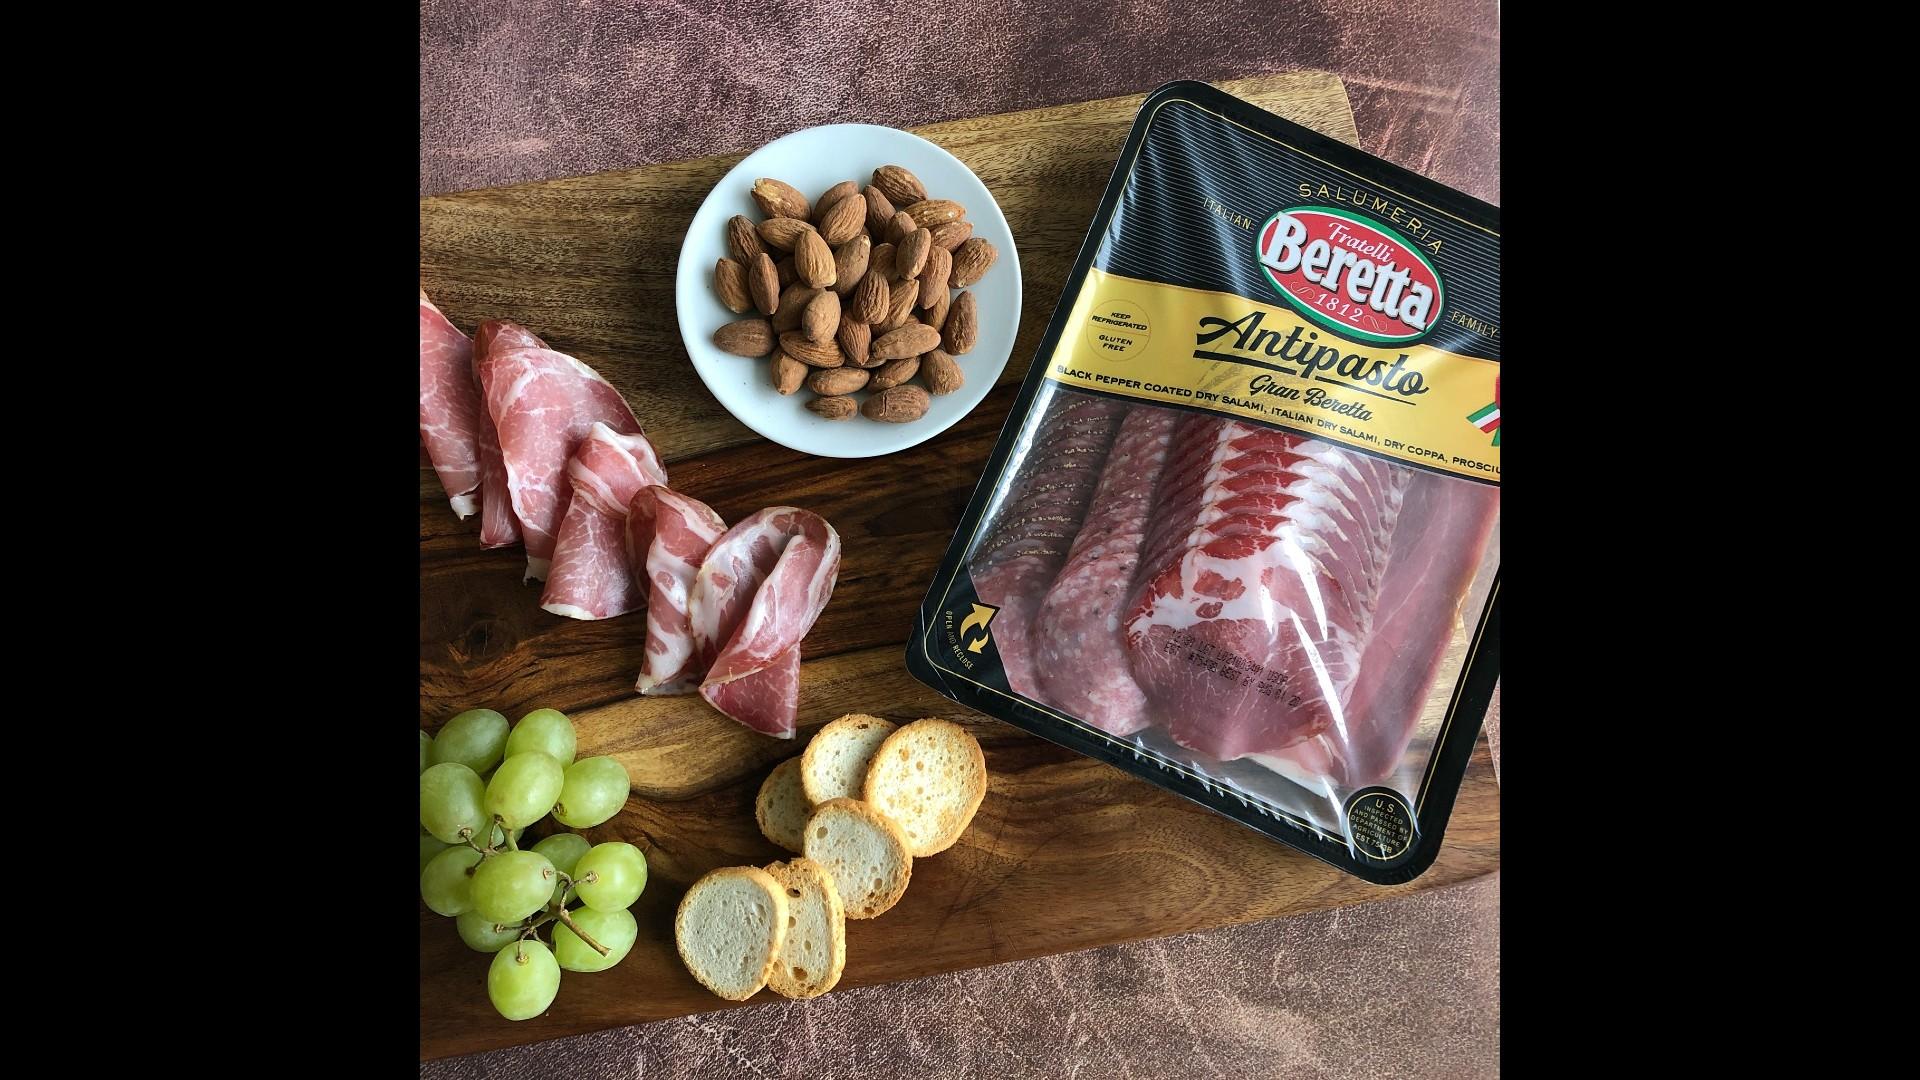 Health officials have linked Fratelli Beretta brand prepackaged uncured antipasto trays to national salmonella outbreaks. (Fratelli Beretta / Facebook)